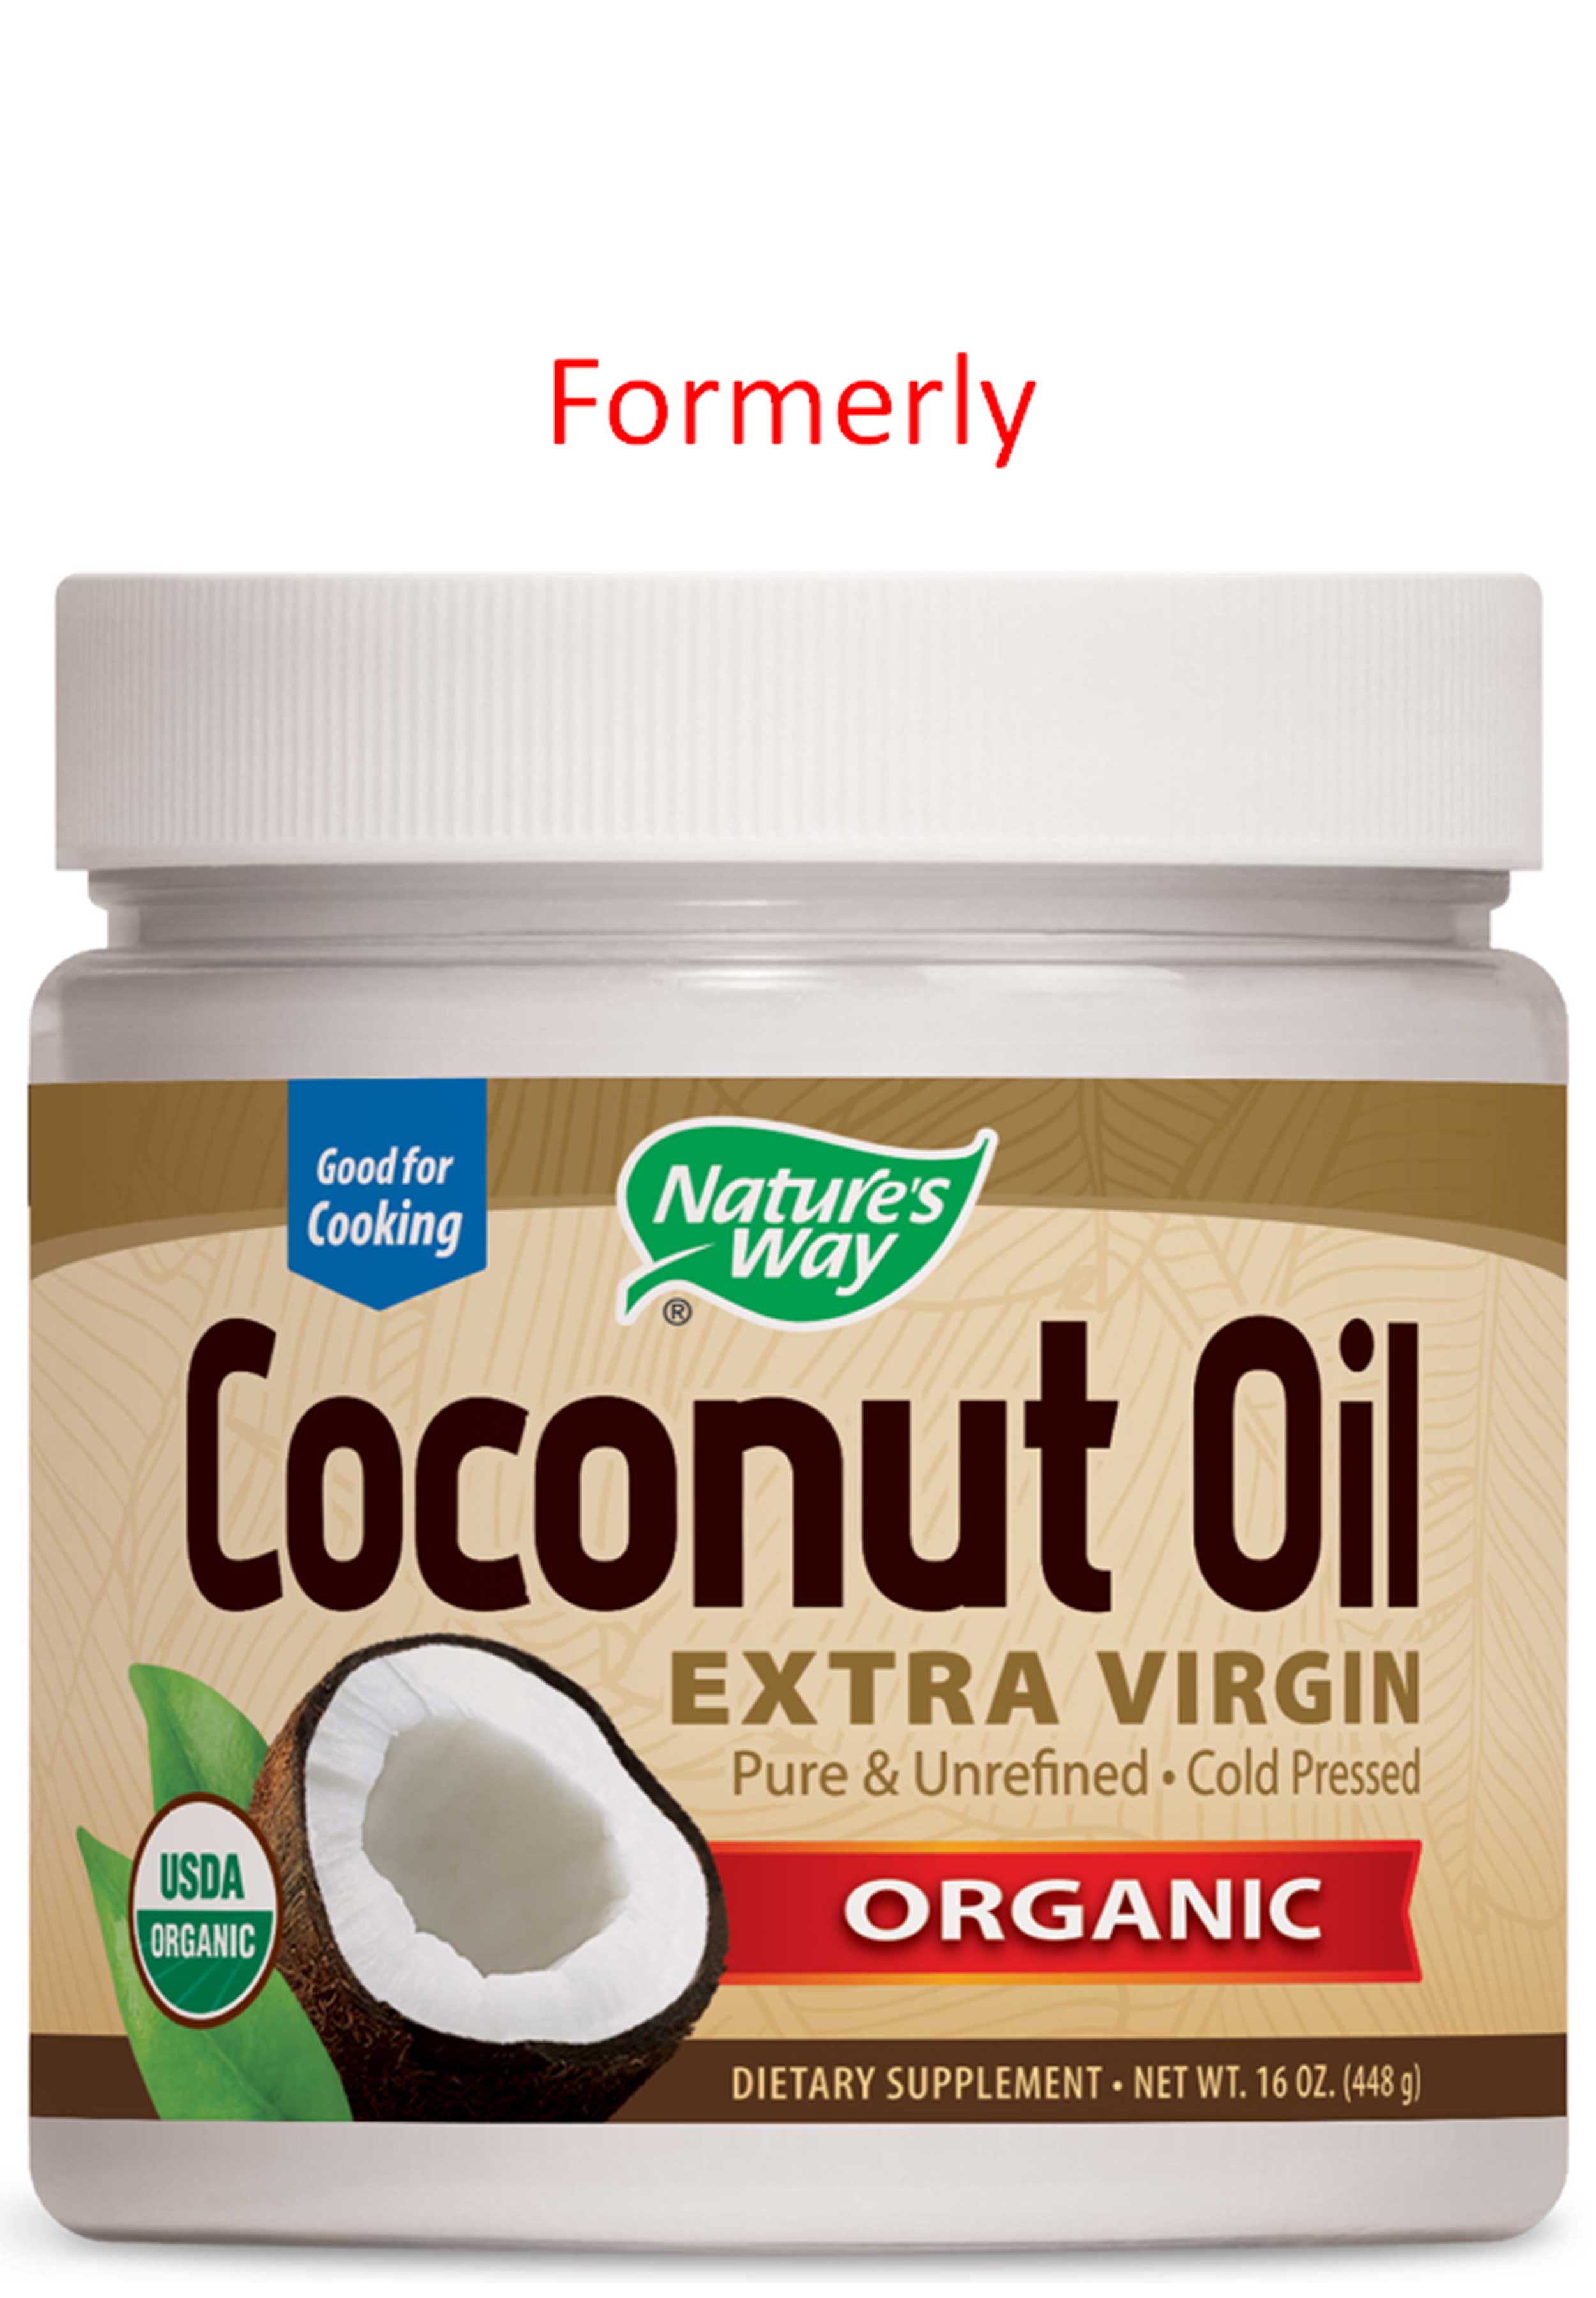 Nature's Way Coconut Oil Organic Extra Virgin Formerly